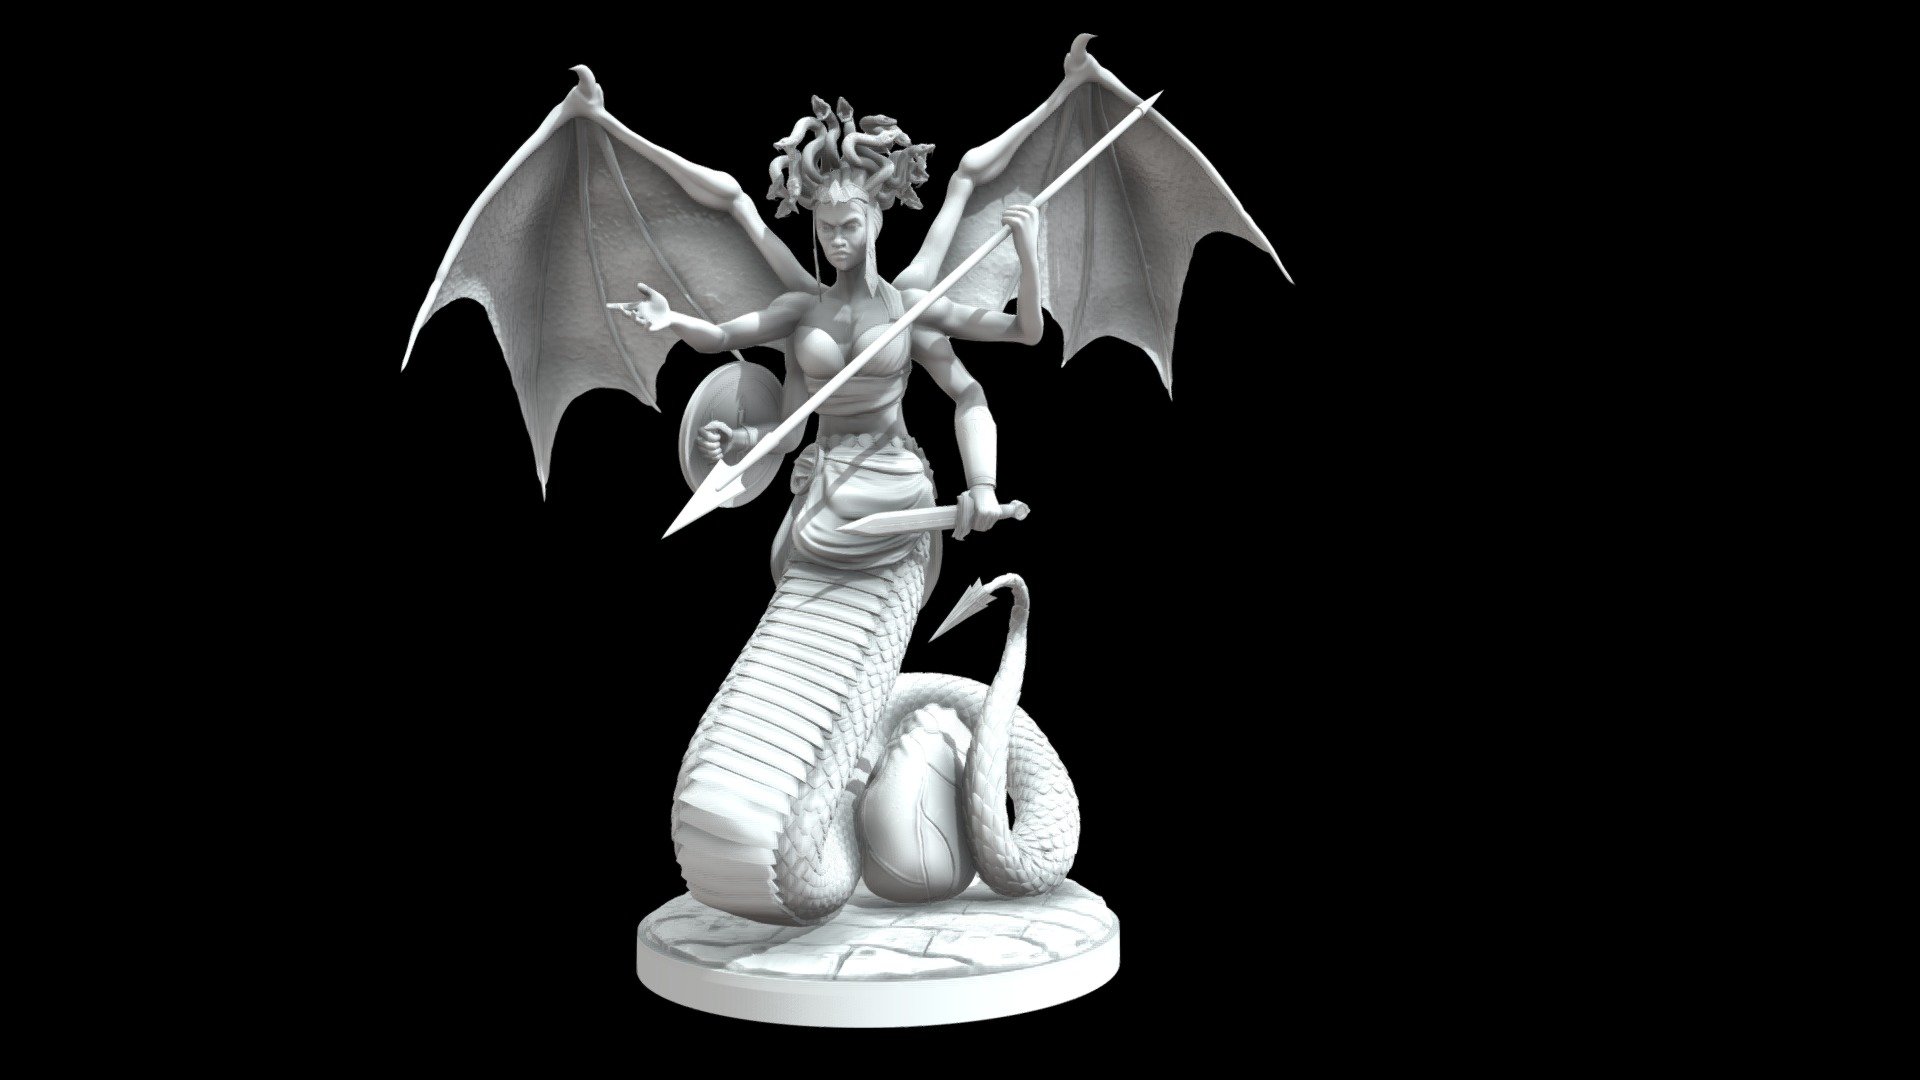 A cool project we just ifnished! We developed this wicked character for a client kickstarter 3D model reward for backers! Meet &ldquo;The Mother of Monsters